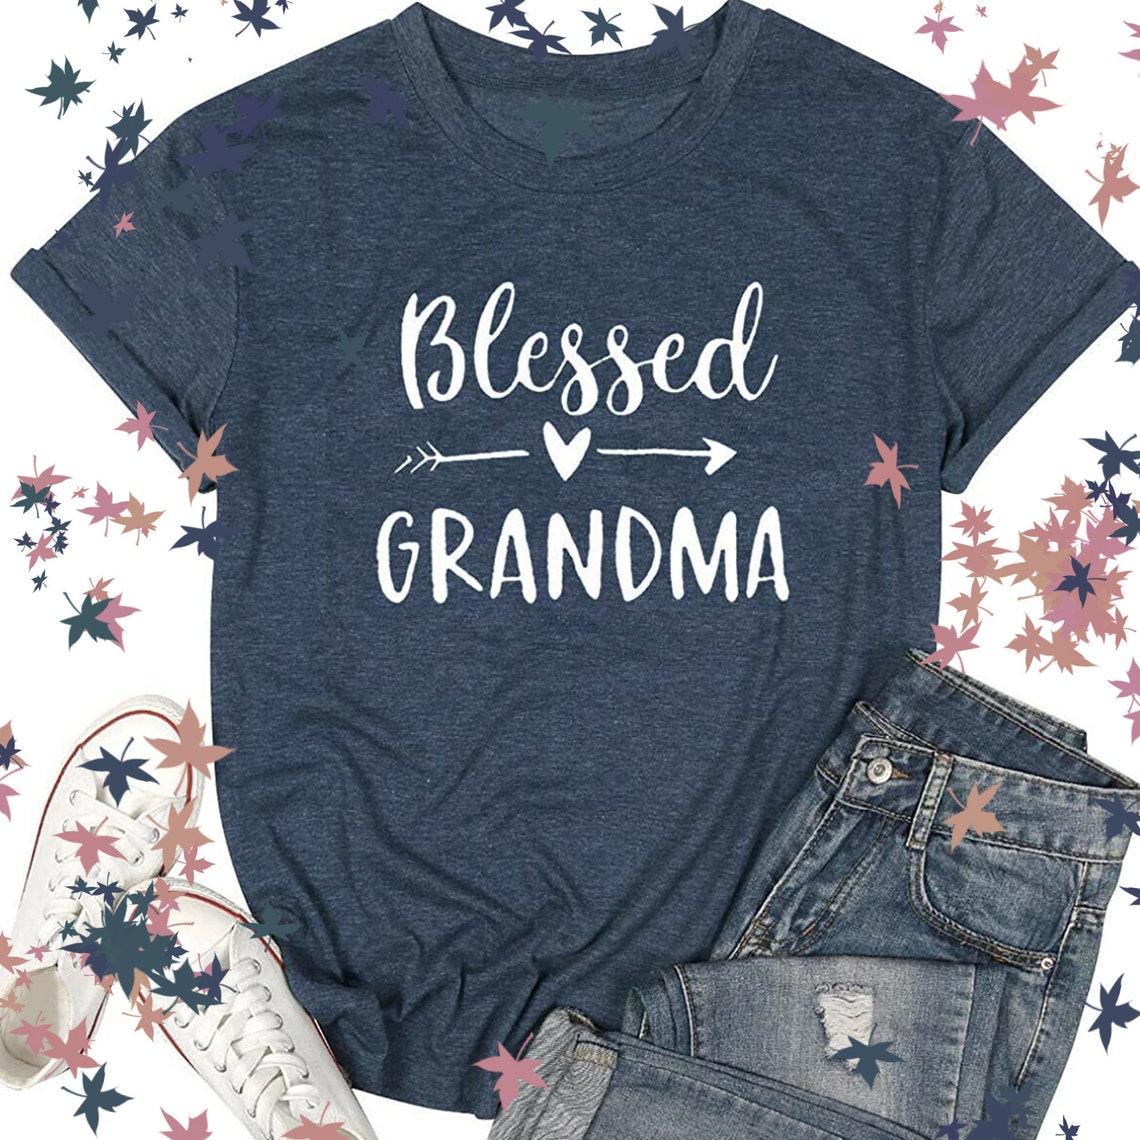 Blessed Grandma Shirt Funny Cute Graphic Tees Women Letter | Etsy